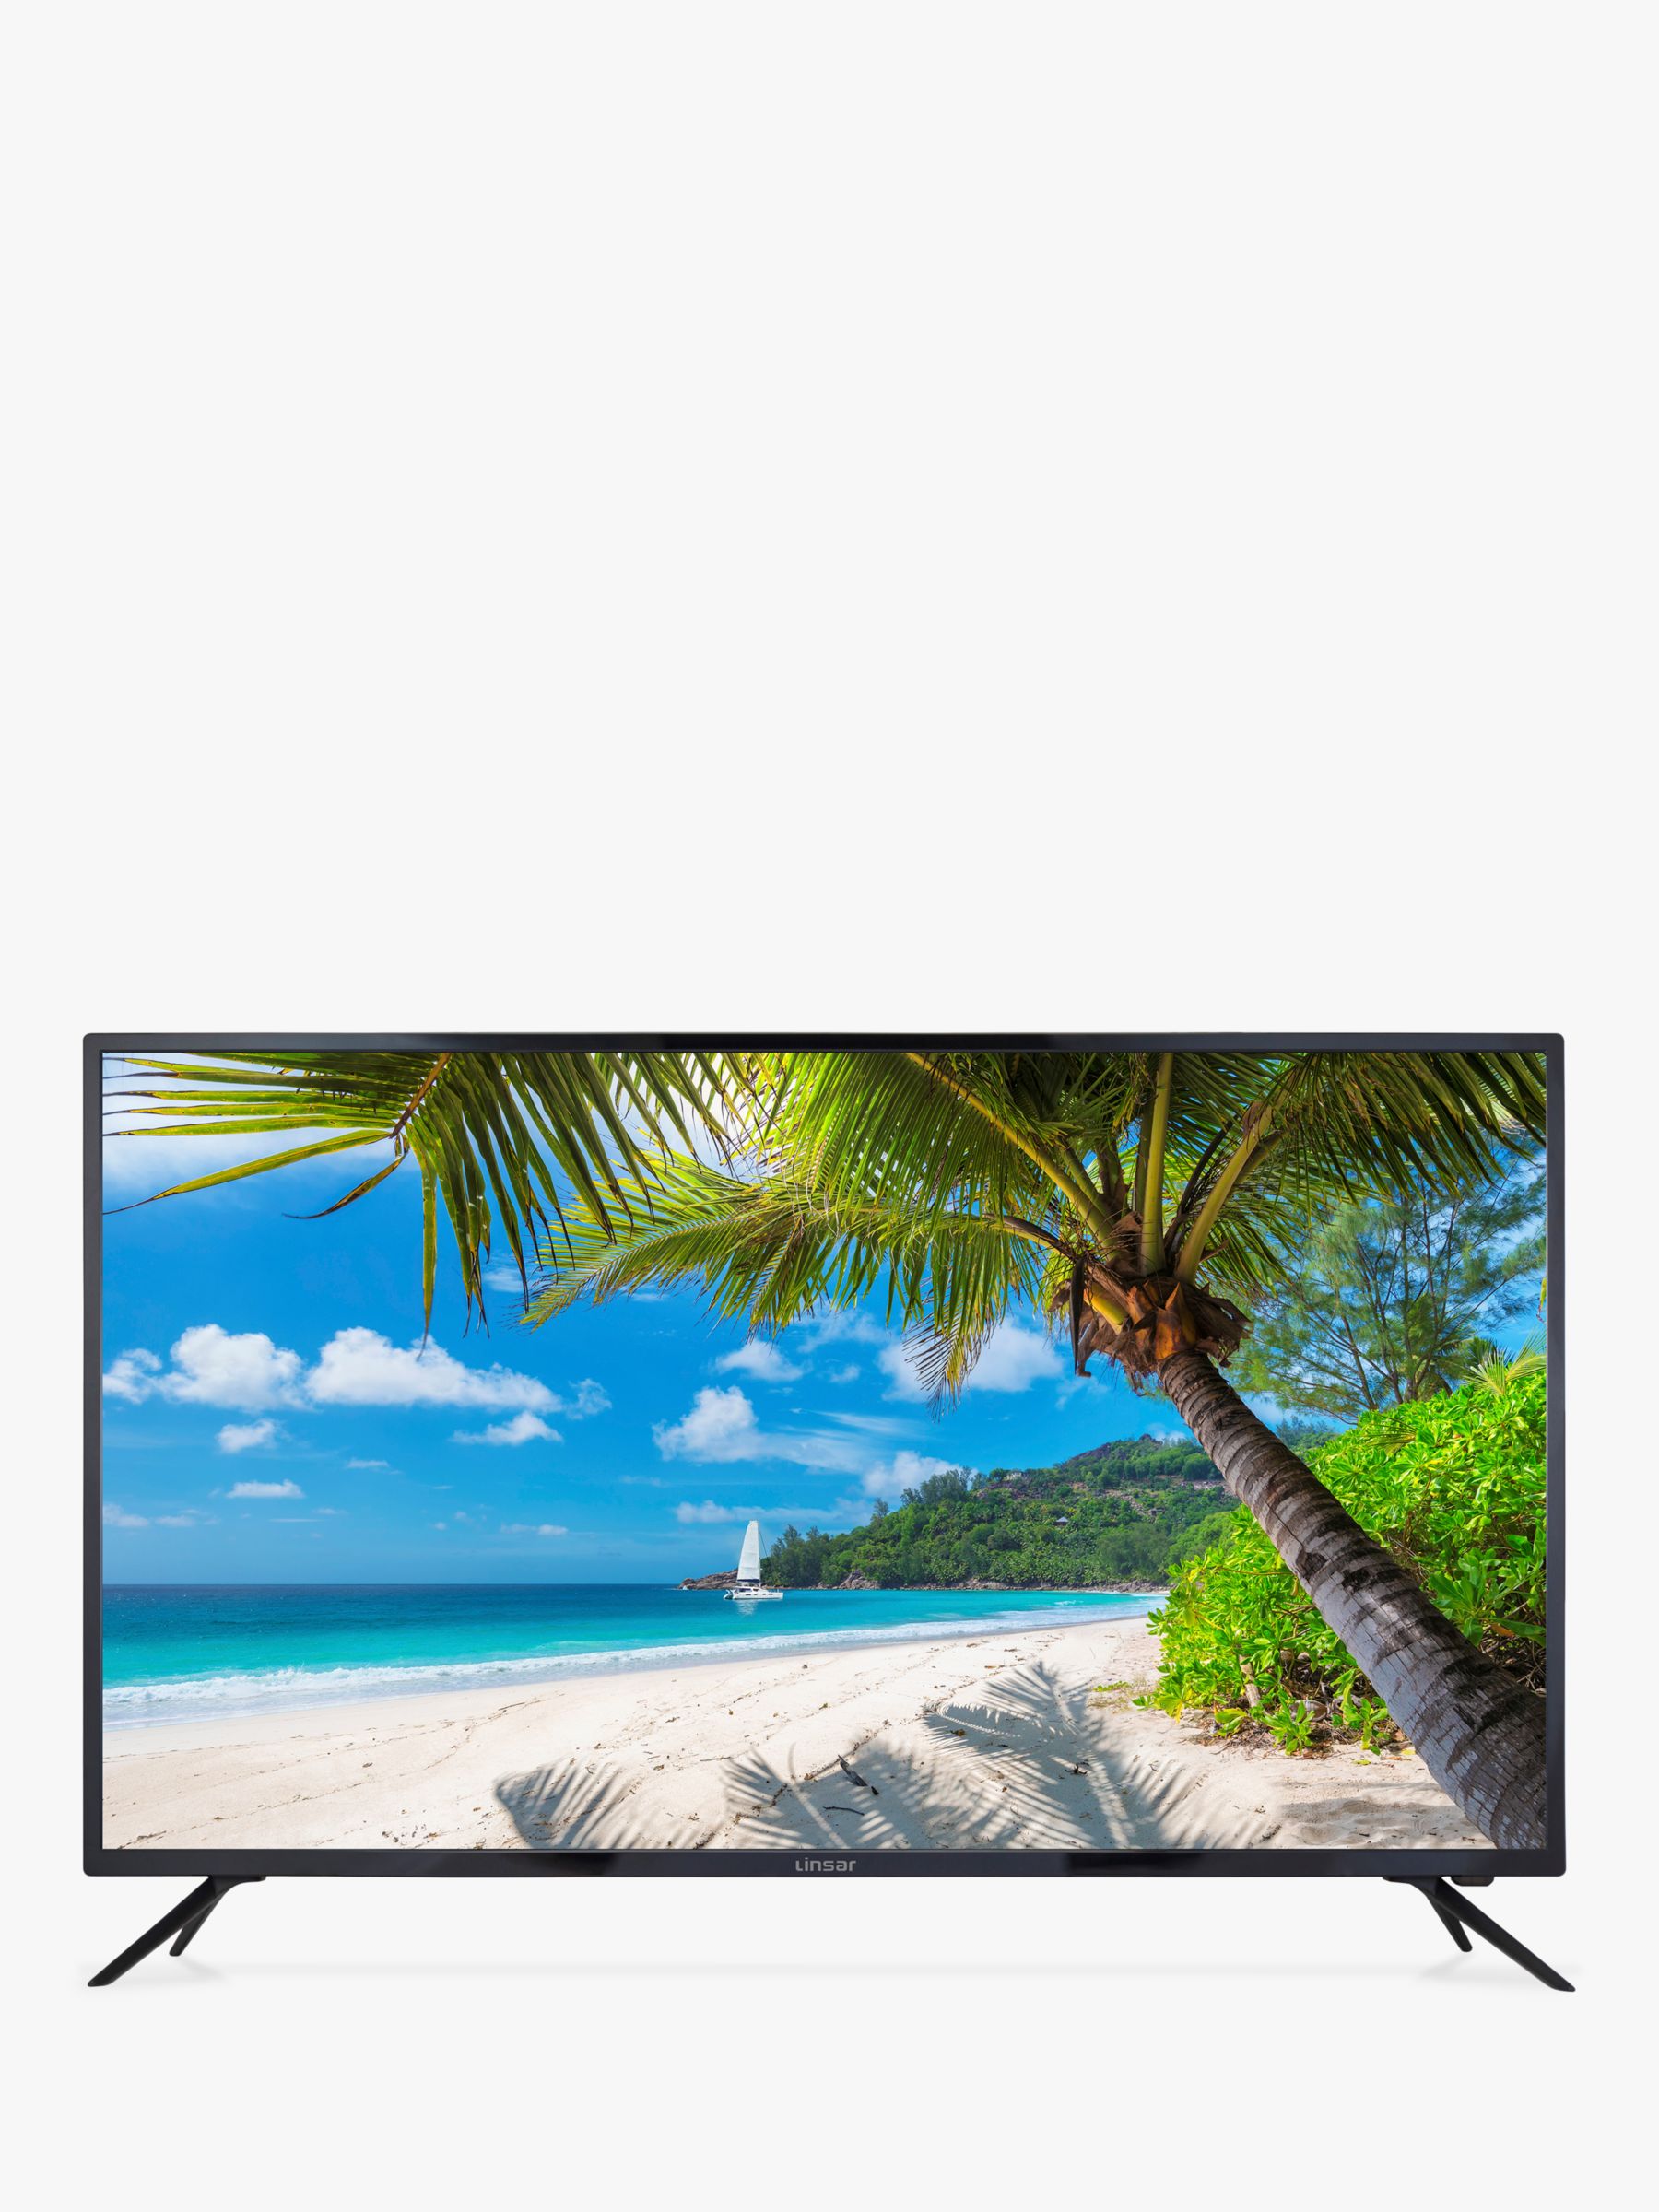 Linsar 50UHD520 LED 4K Ultra HD TV, 50 with Freeview HD, Black